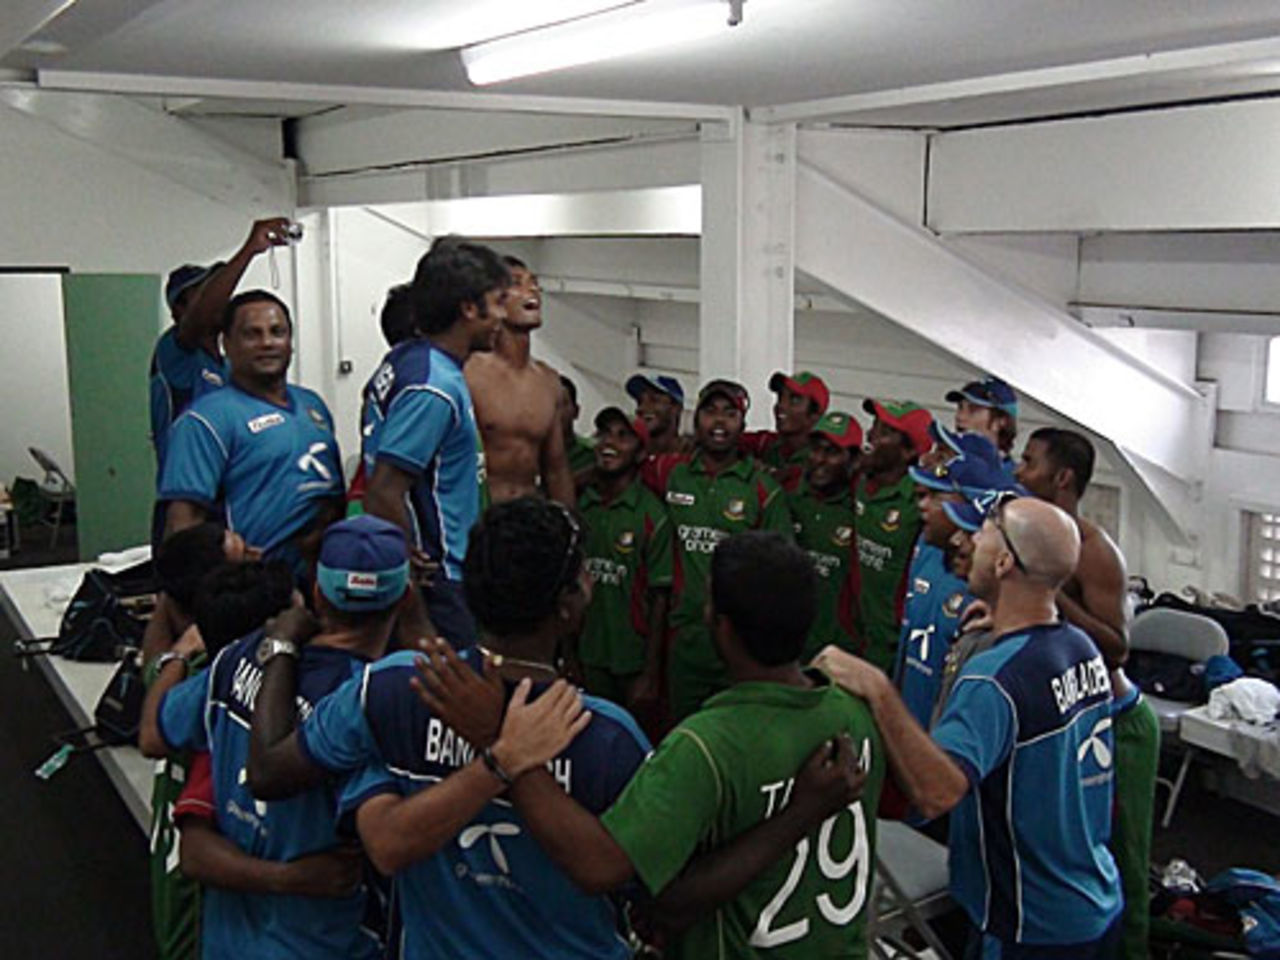 A jubilant Bangladesh team after their historic ODI series win in West Indies, Basseterre, July 31, 2009